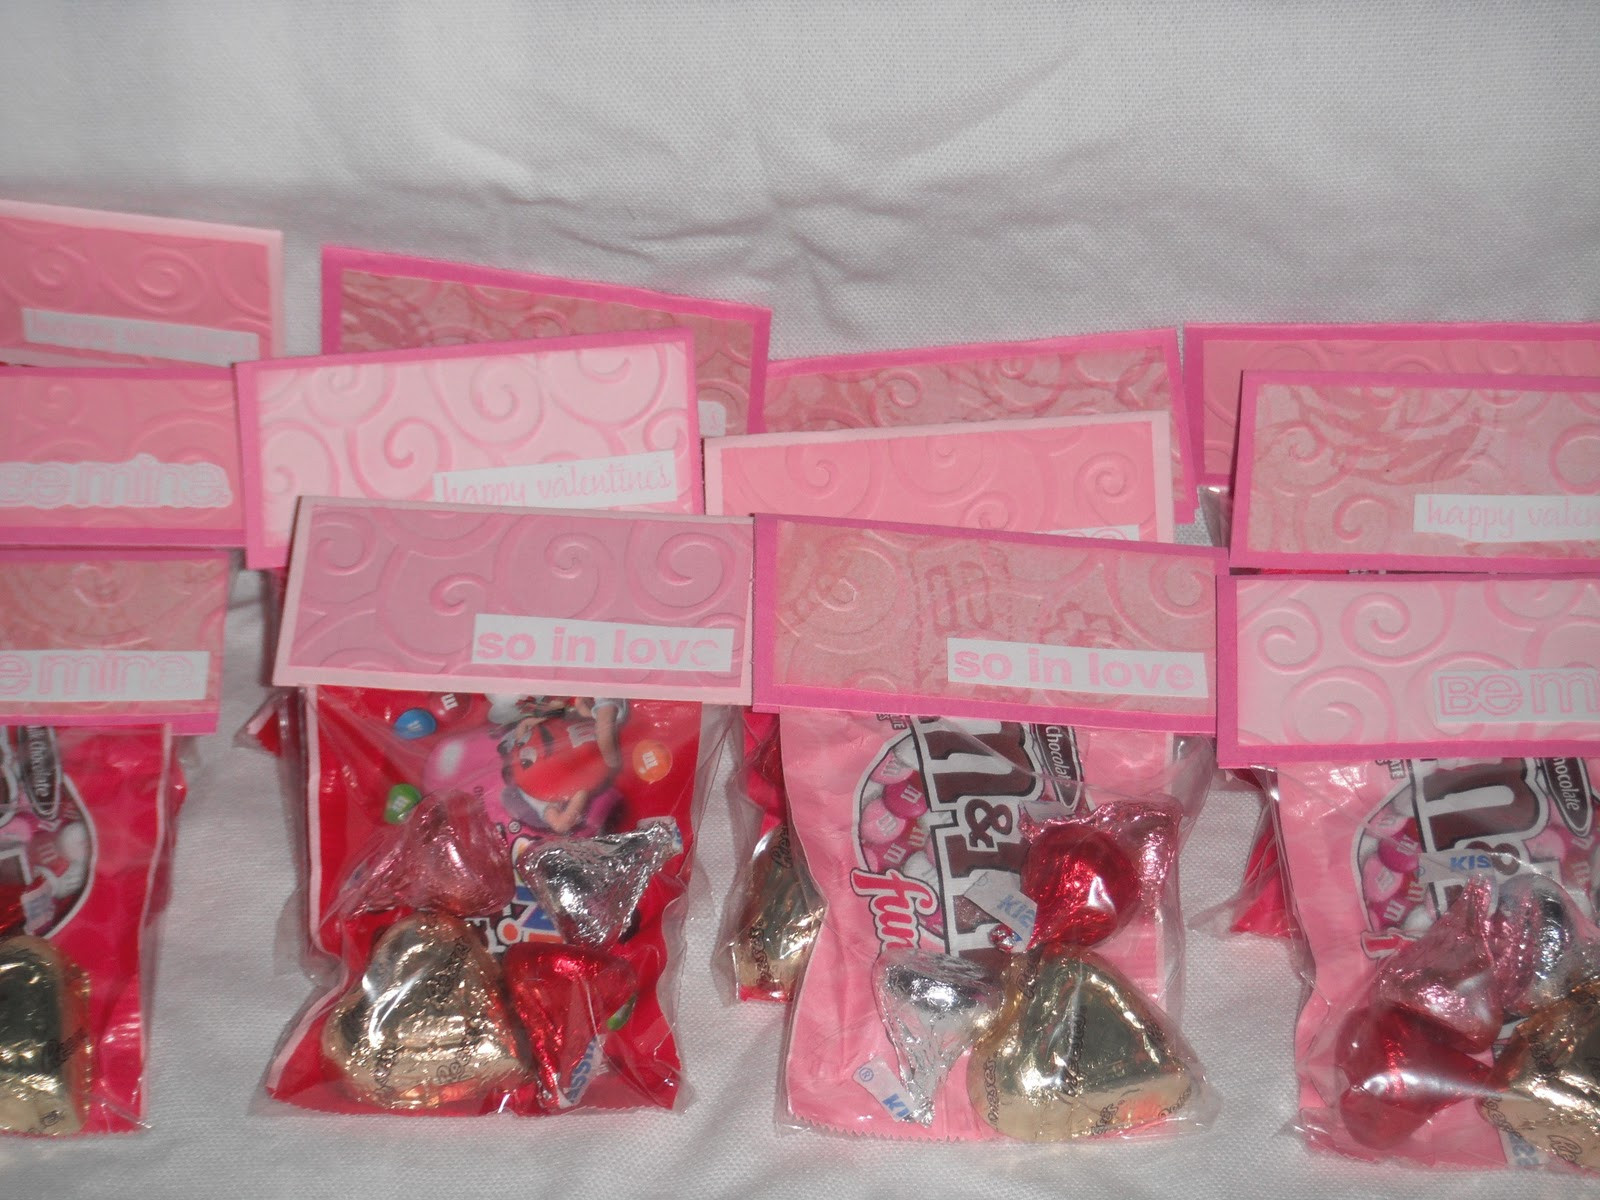 Valentines Day Goodie Bag Ideas
 Creativity with Recycling Valentine s Day goody bags